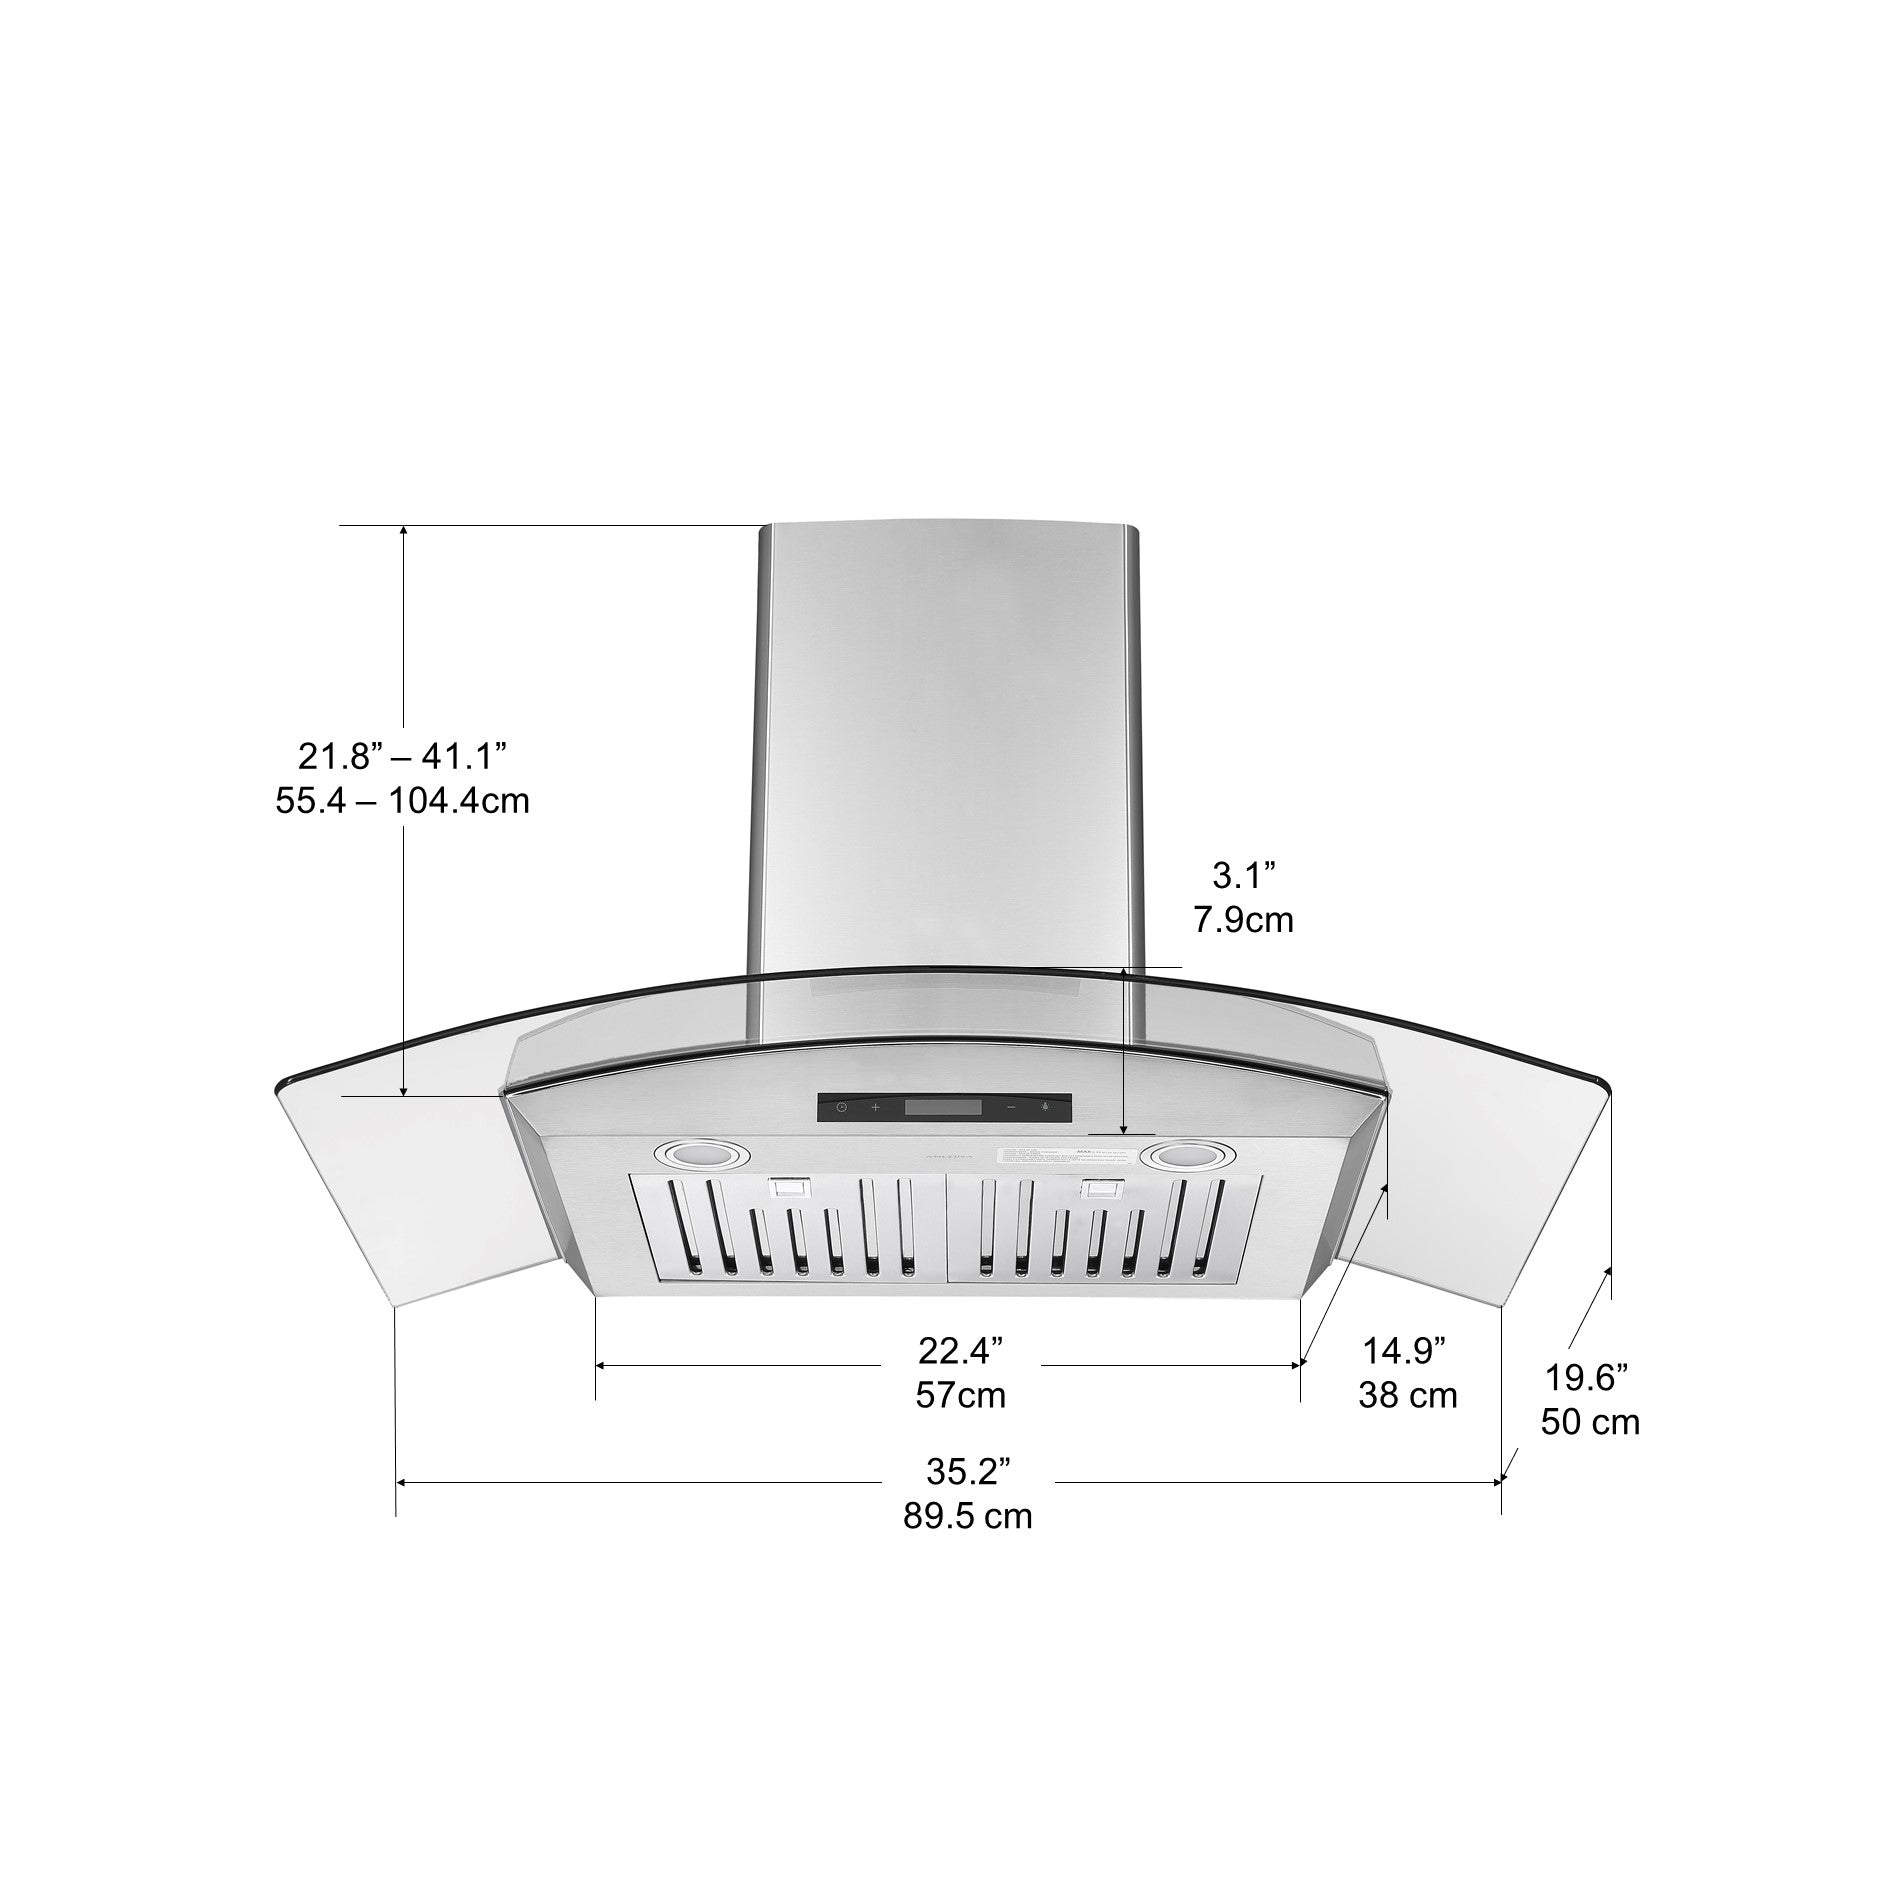 GCB636 36 in. Glass Canopy Range Hood in Stainless Steel